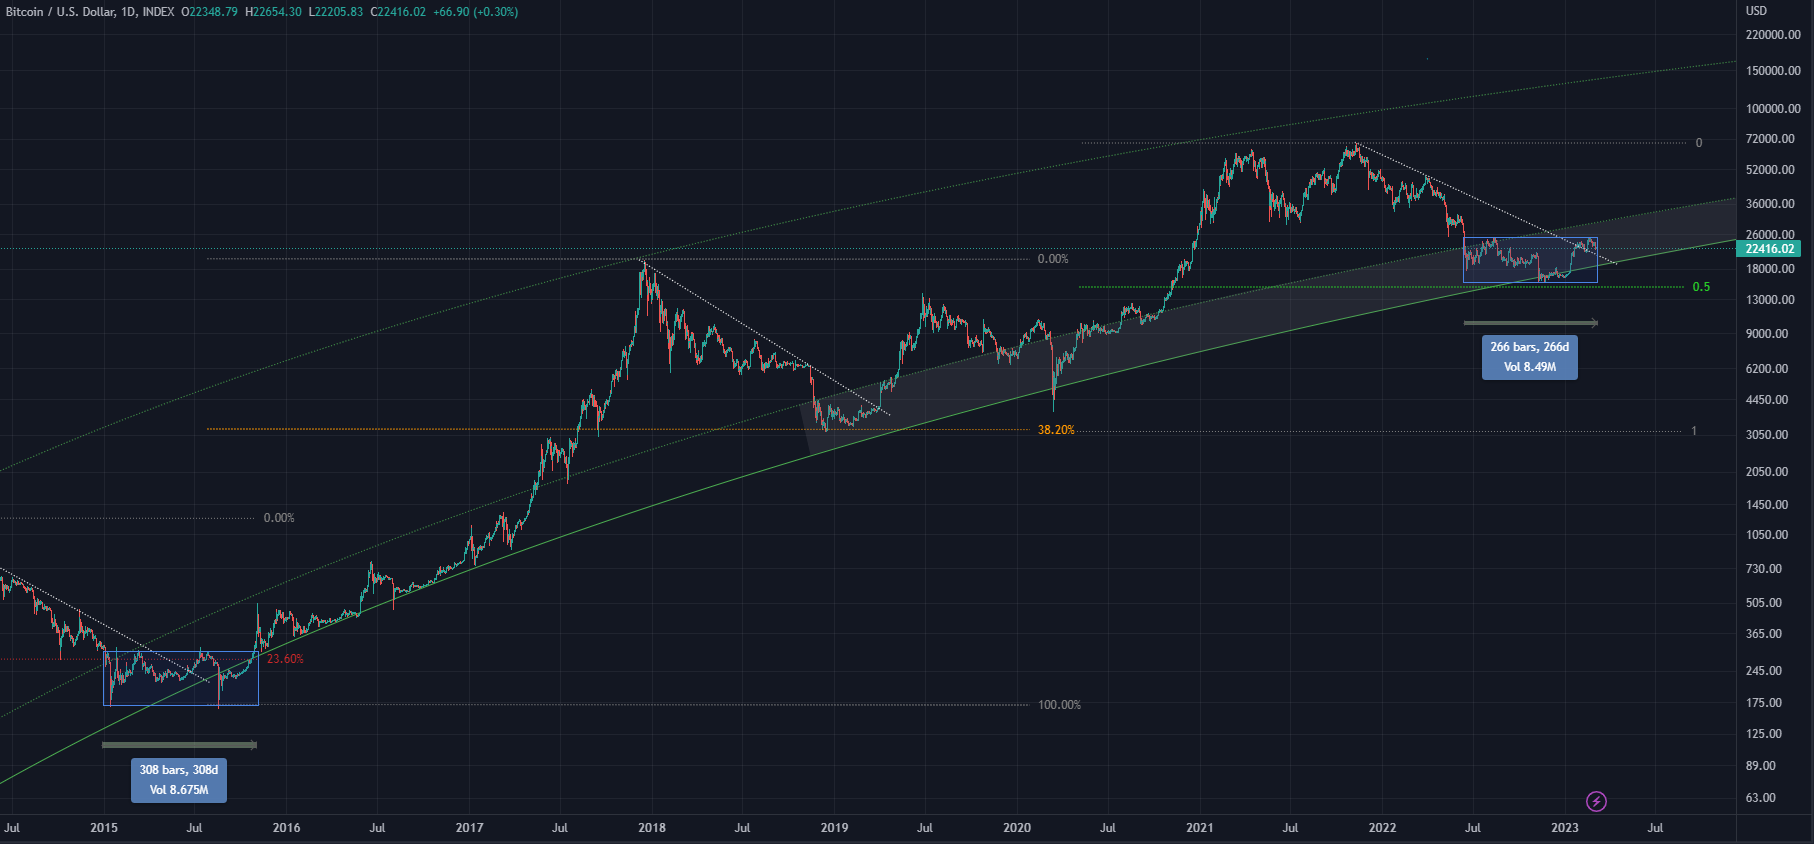 Bitcoin (BTC) Move Toward $70,000 Is Possible, According to